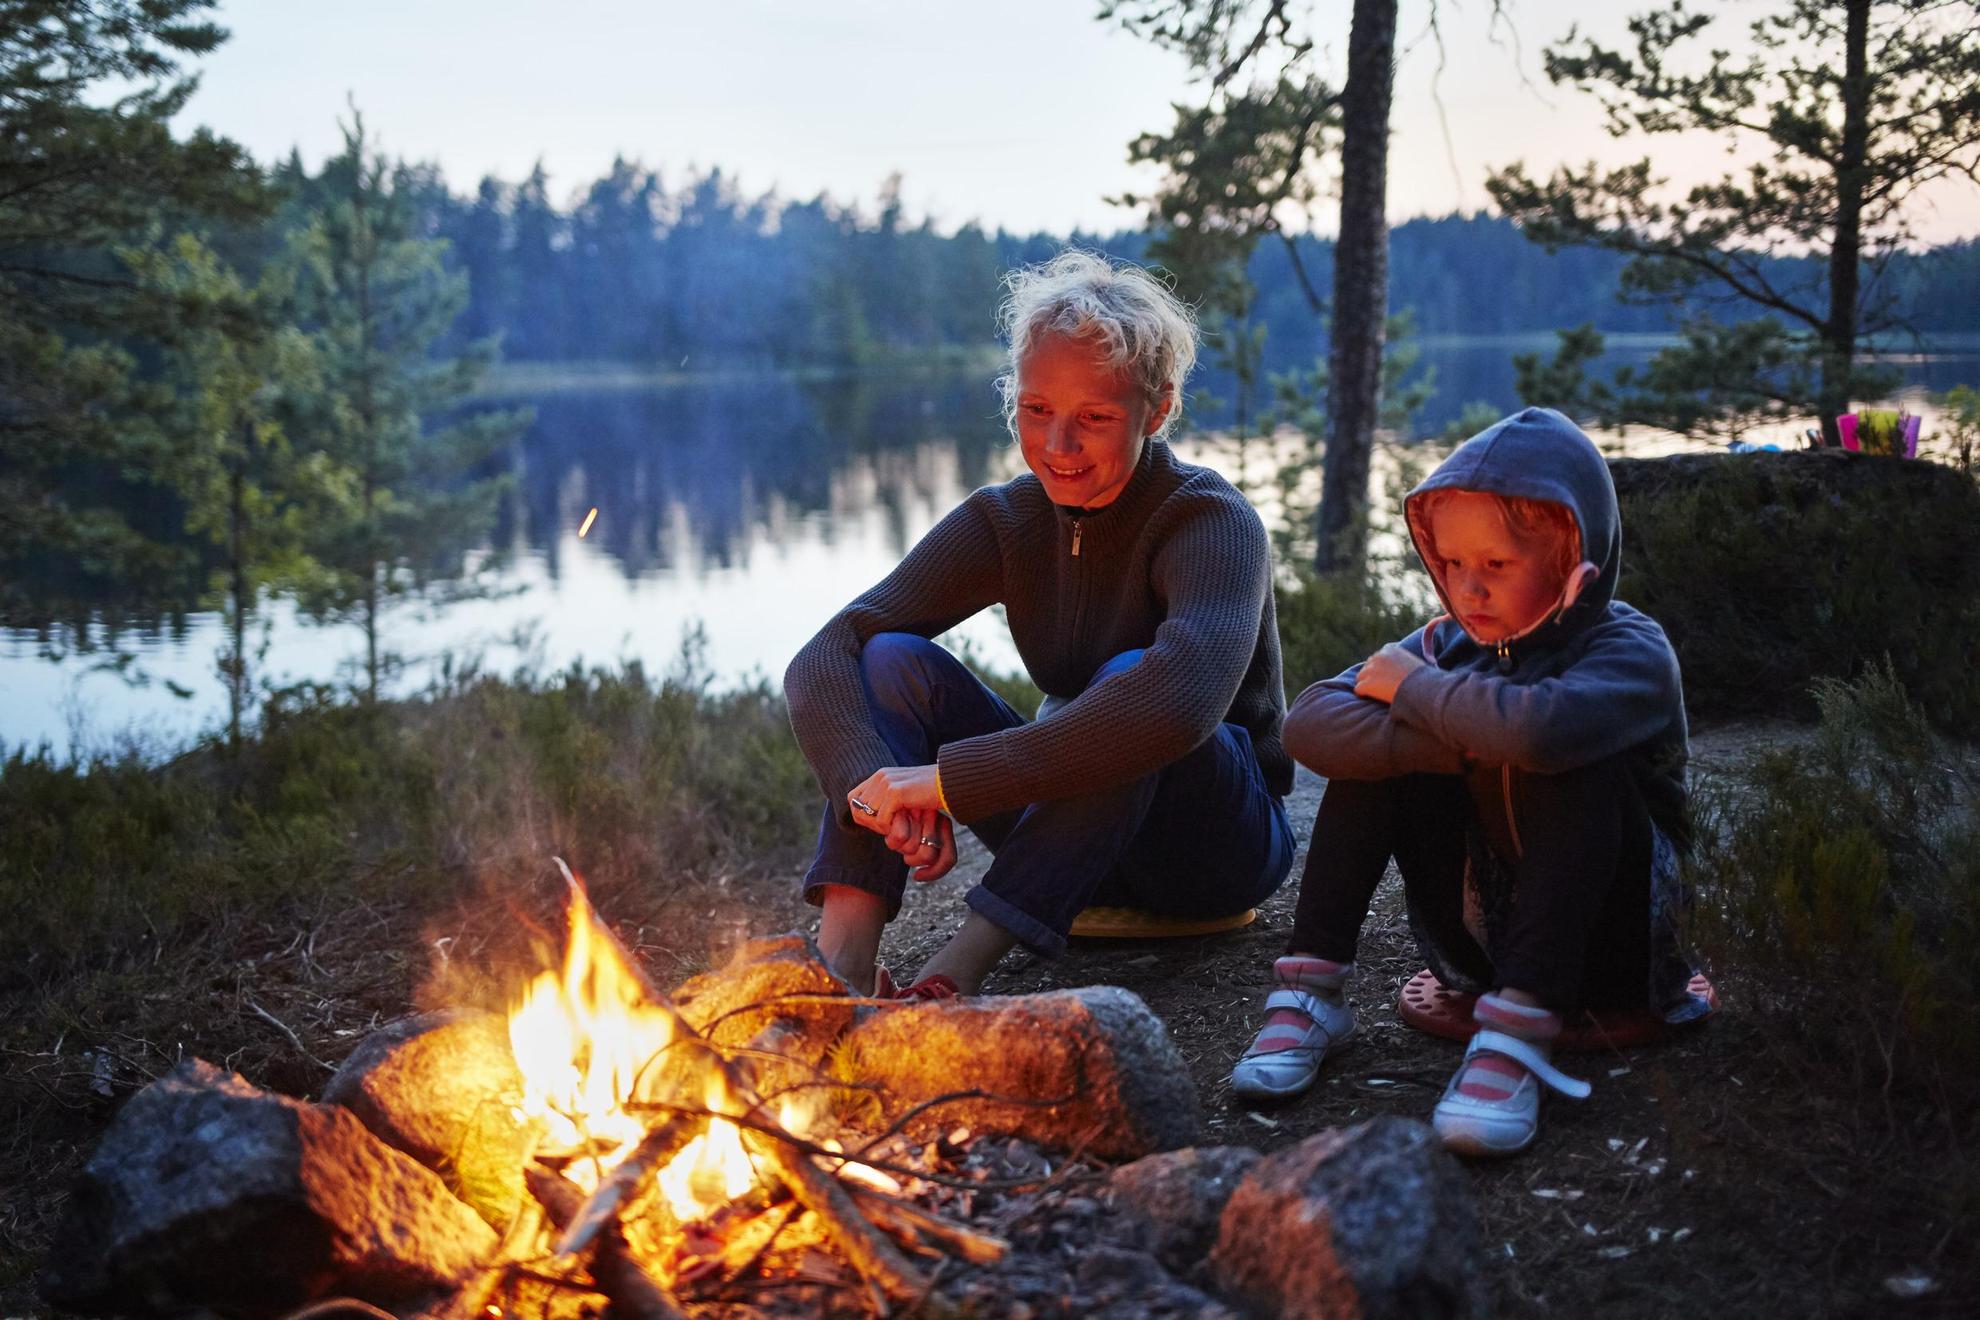 It's evening and two people in Sweden are sitting by a fire in the woods next to a lake.